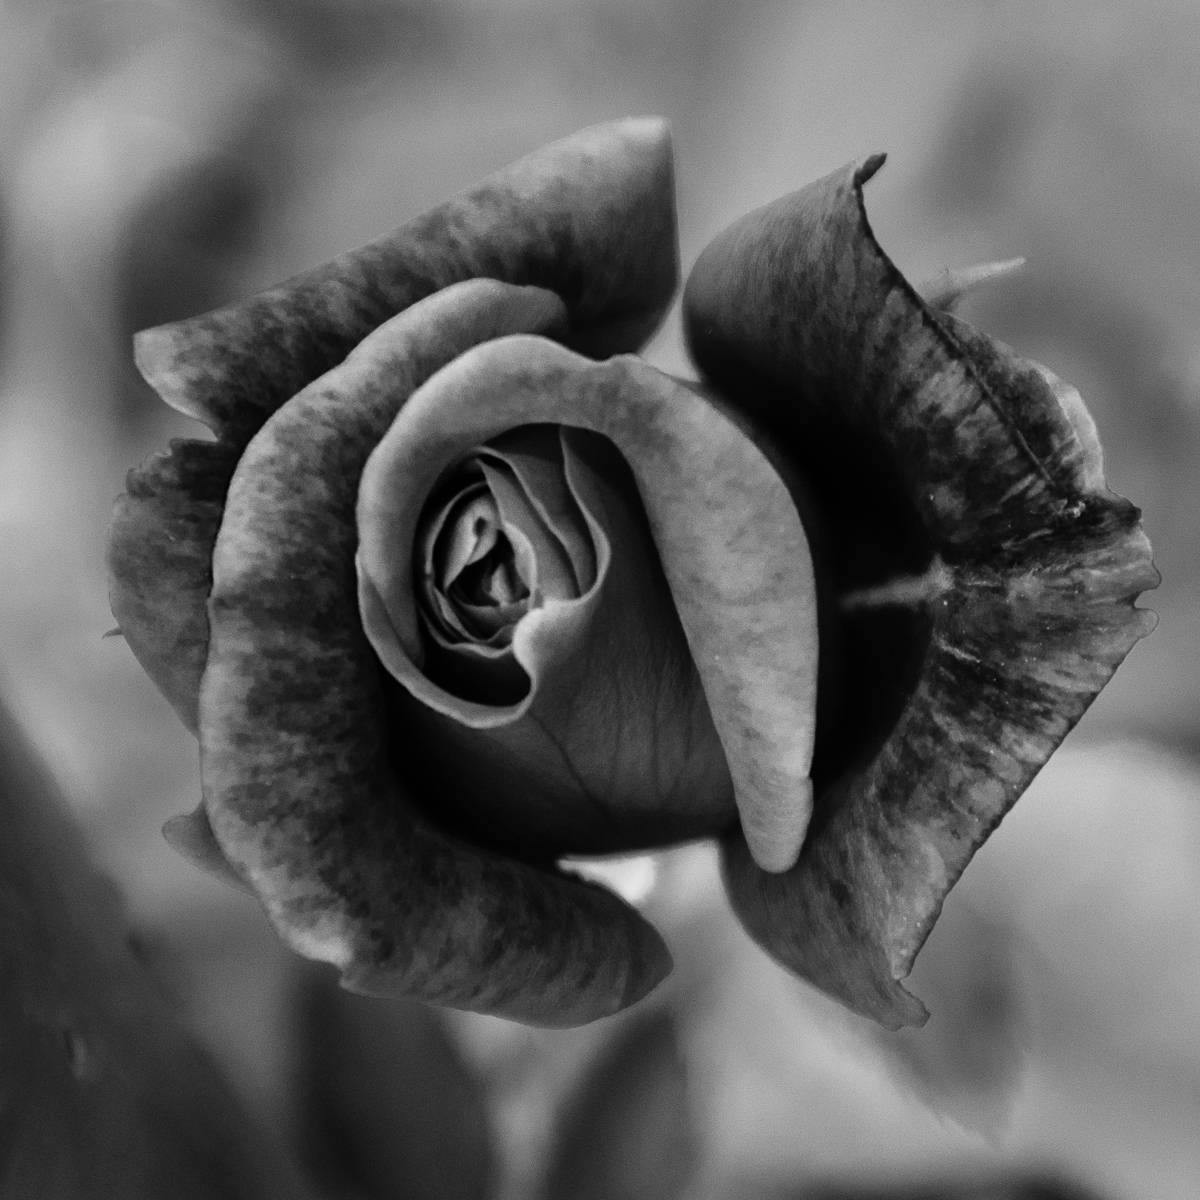 Prince Albert Rose in Black and White - Square Nature / Floral Photo Fine Art & Unframed Wall Art Prints  - PIPAFINEART